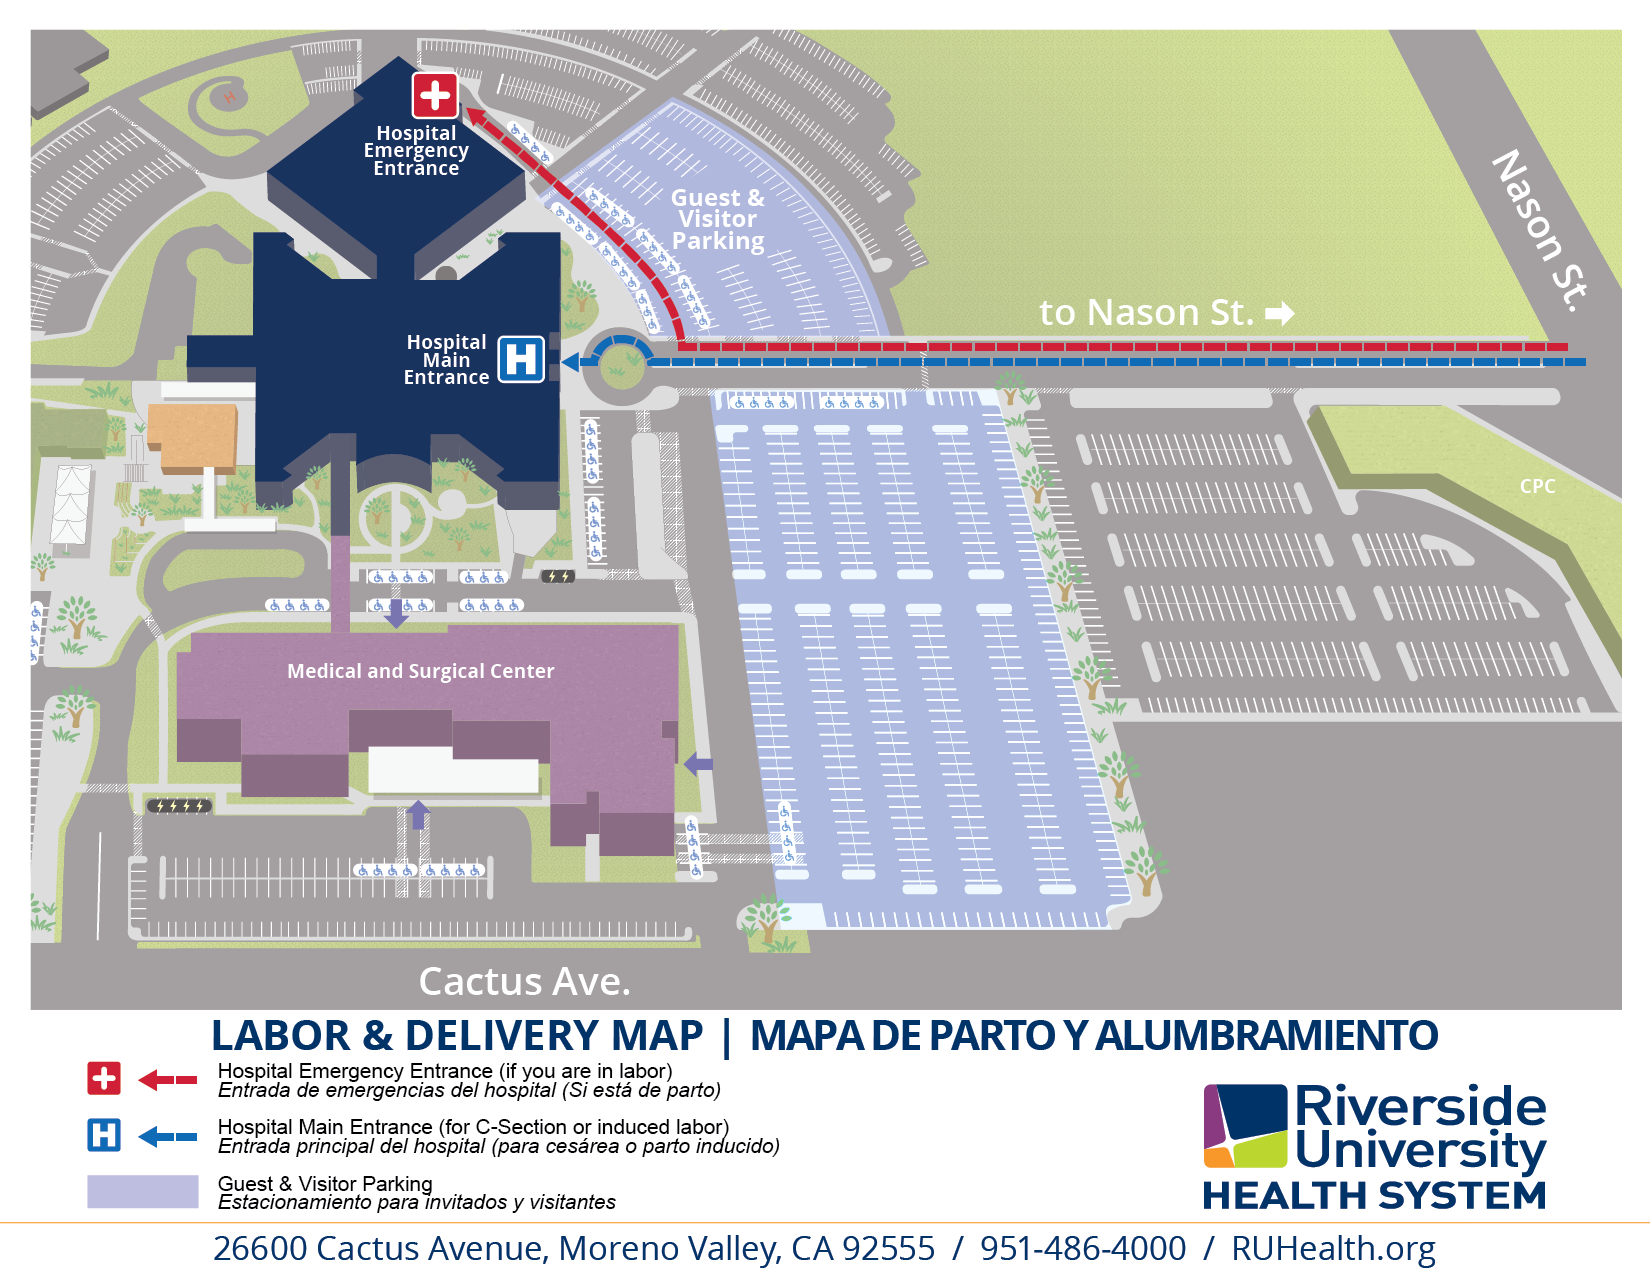 "Labor_Delivery_Map"